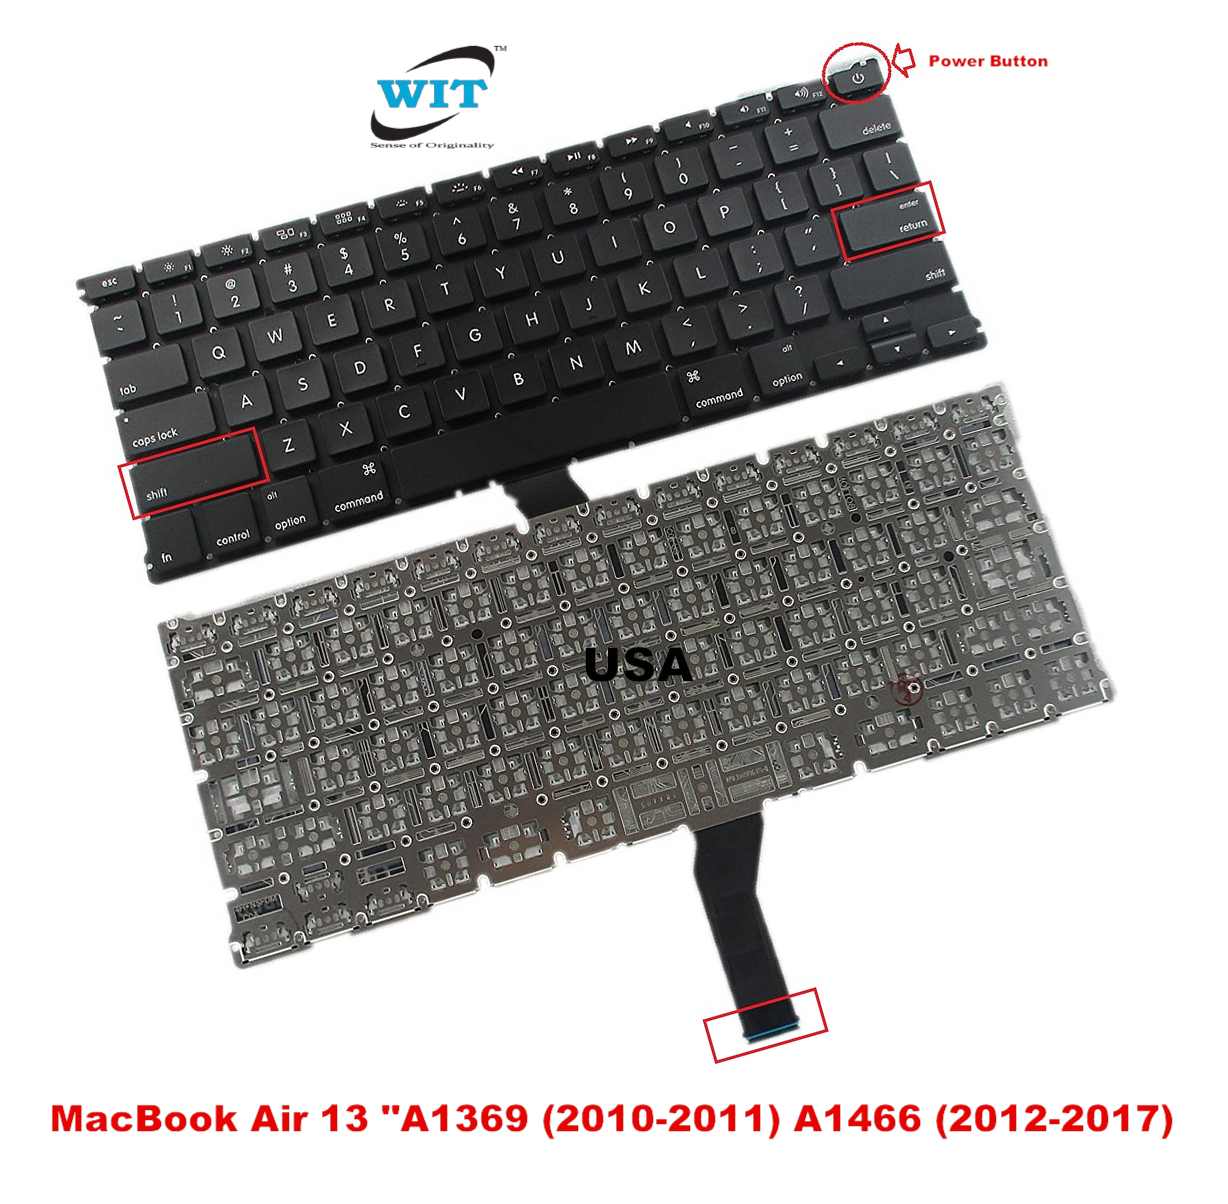 Keyboard for Apple MacBook Air 13 inch A1369 (Late 2010-Mid 2011) A1466  (Mid 2012 – Mid 2017)